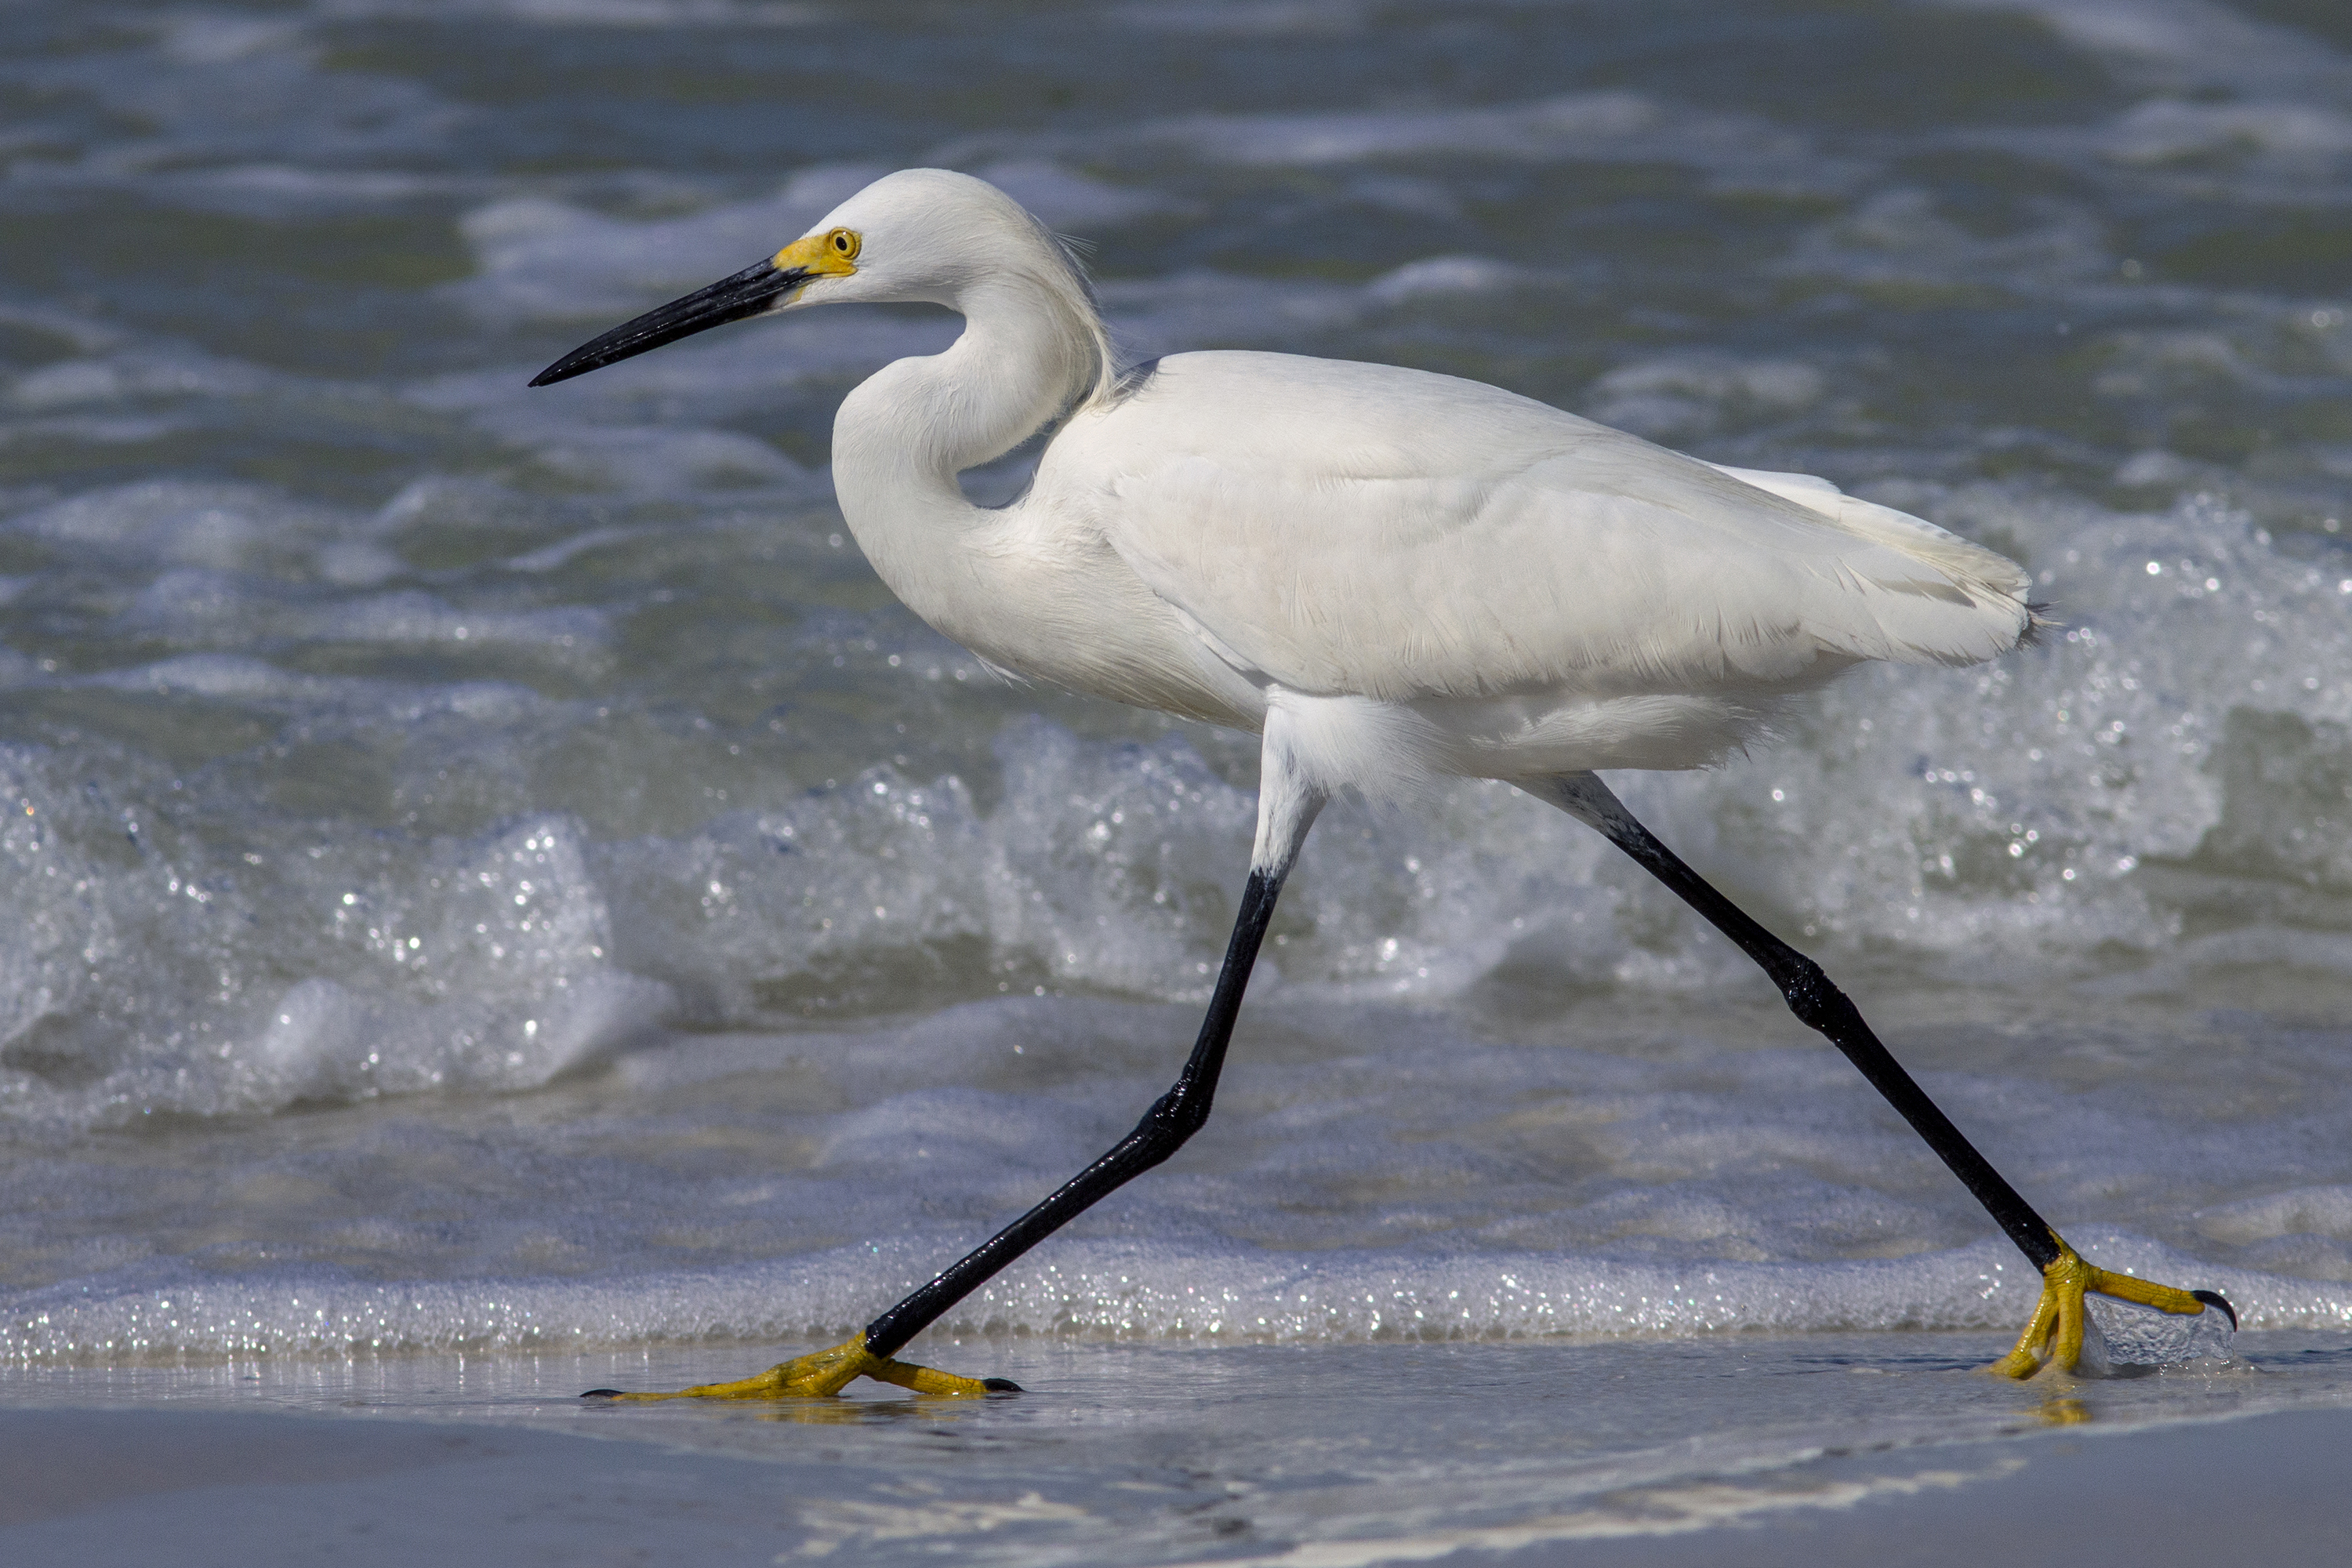 a white bird with long legs walking on the beach